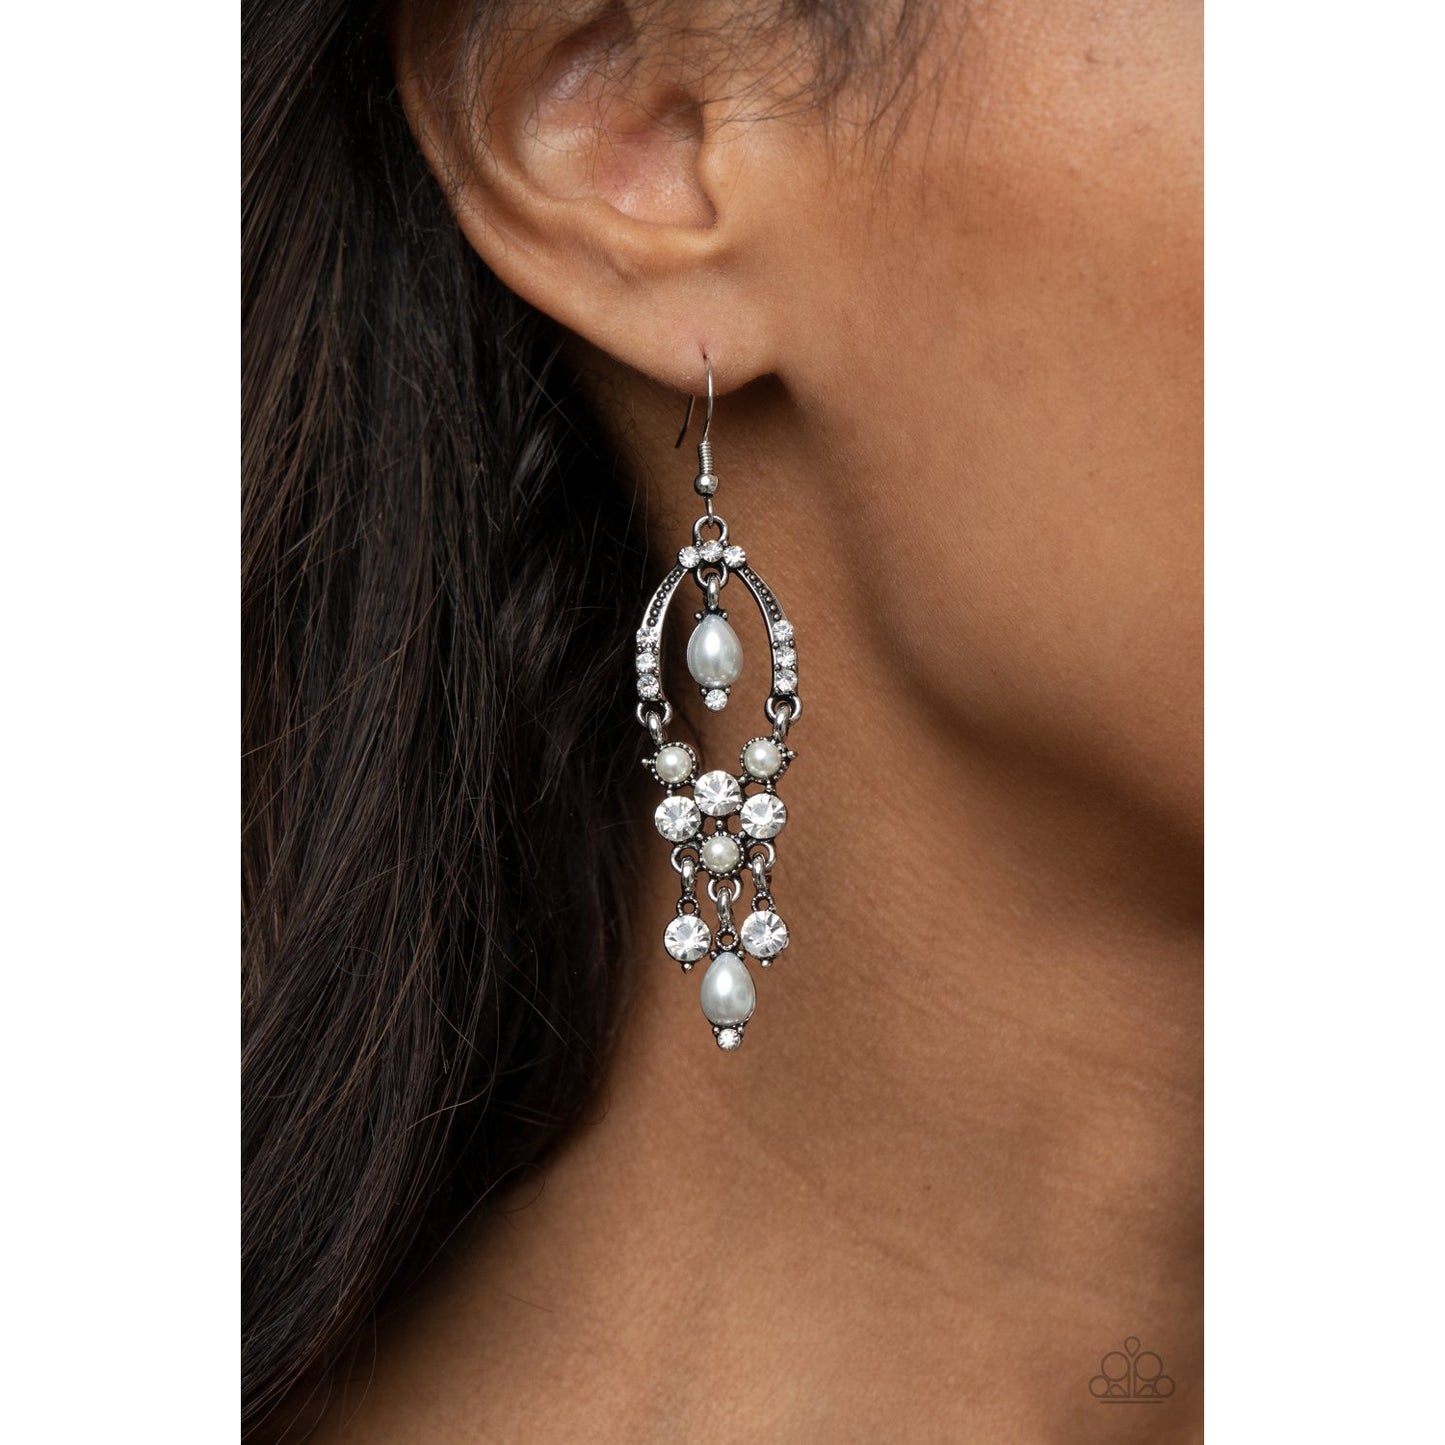 Back In The Spotlight - White Earrings - Paparazzi Accessories - GlaMarous Titi Jewels